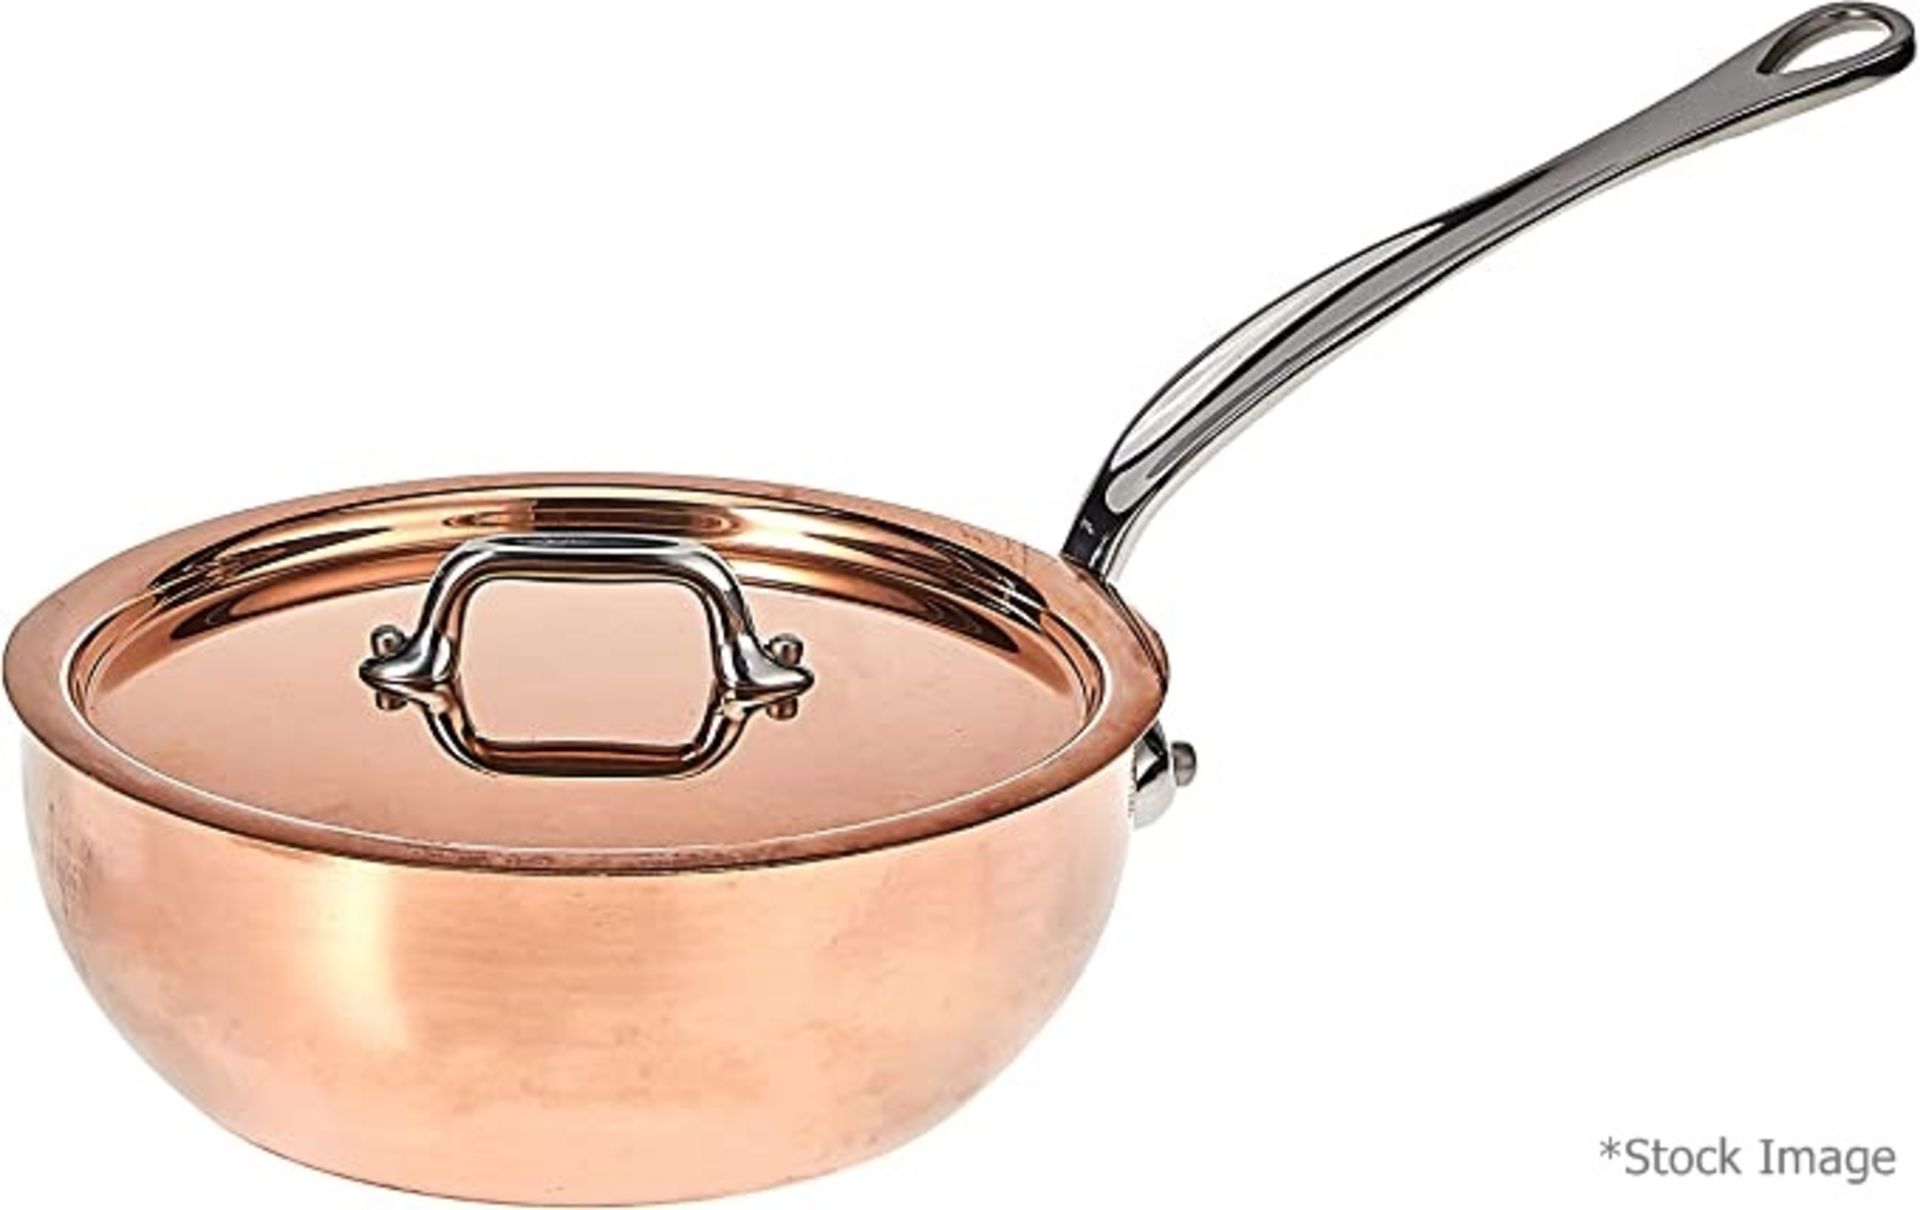 1 x MAUVEL 1830 Quart Splayed Saute Pan with Lid and Cast Stainless Steel Handle - RRP £300.00